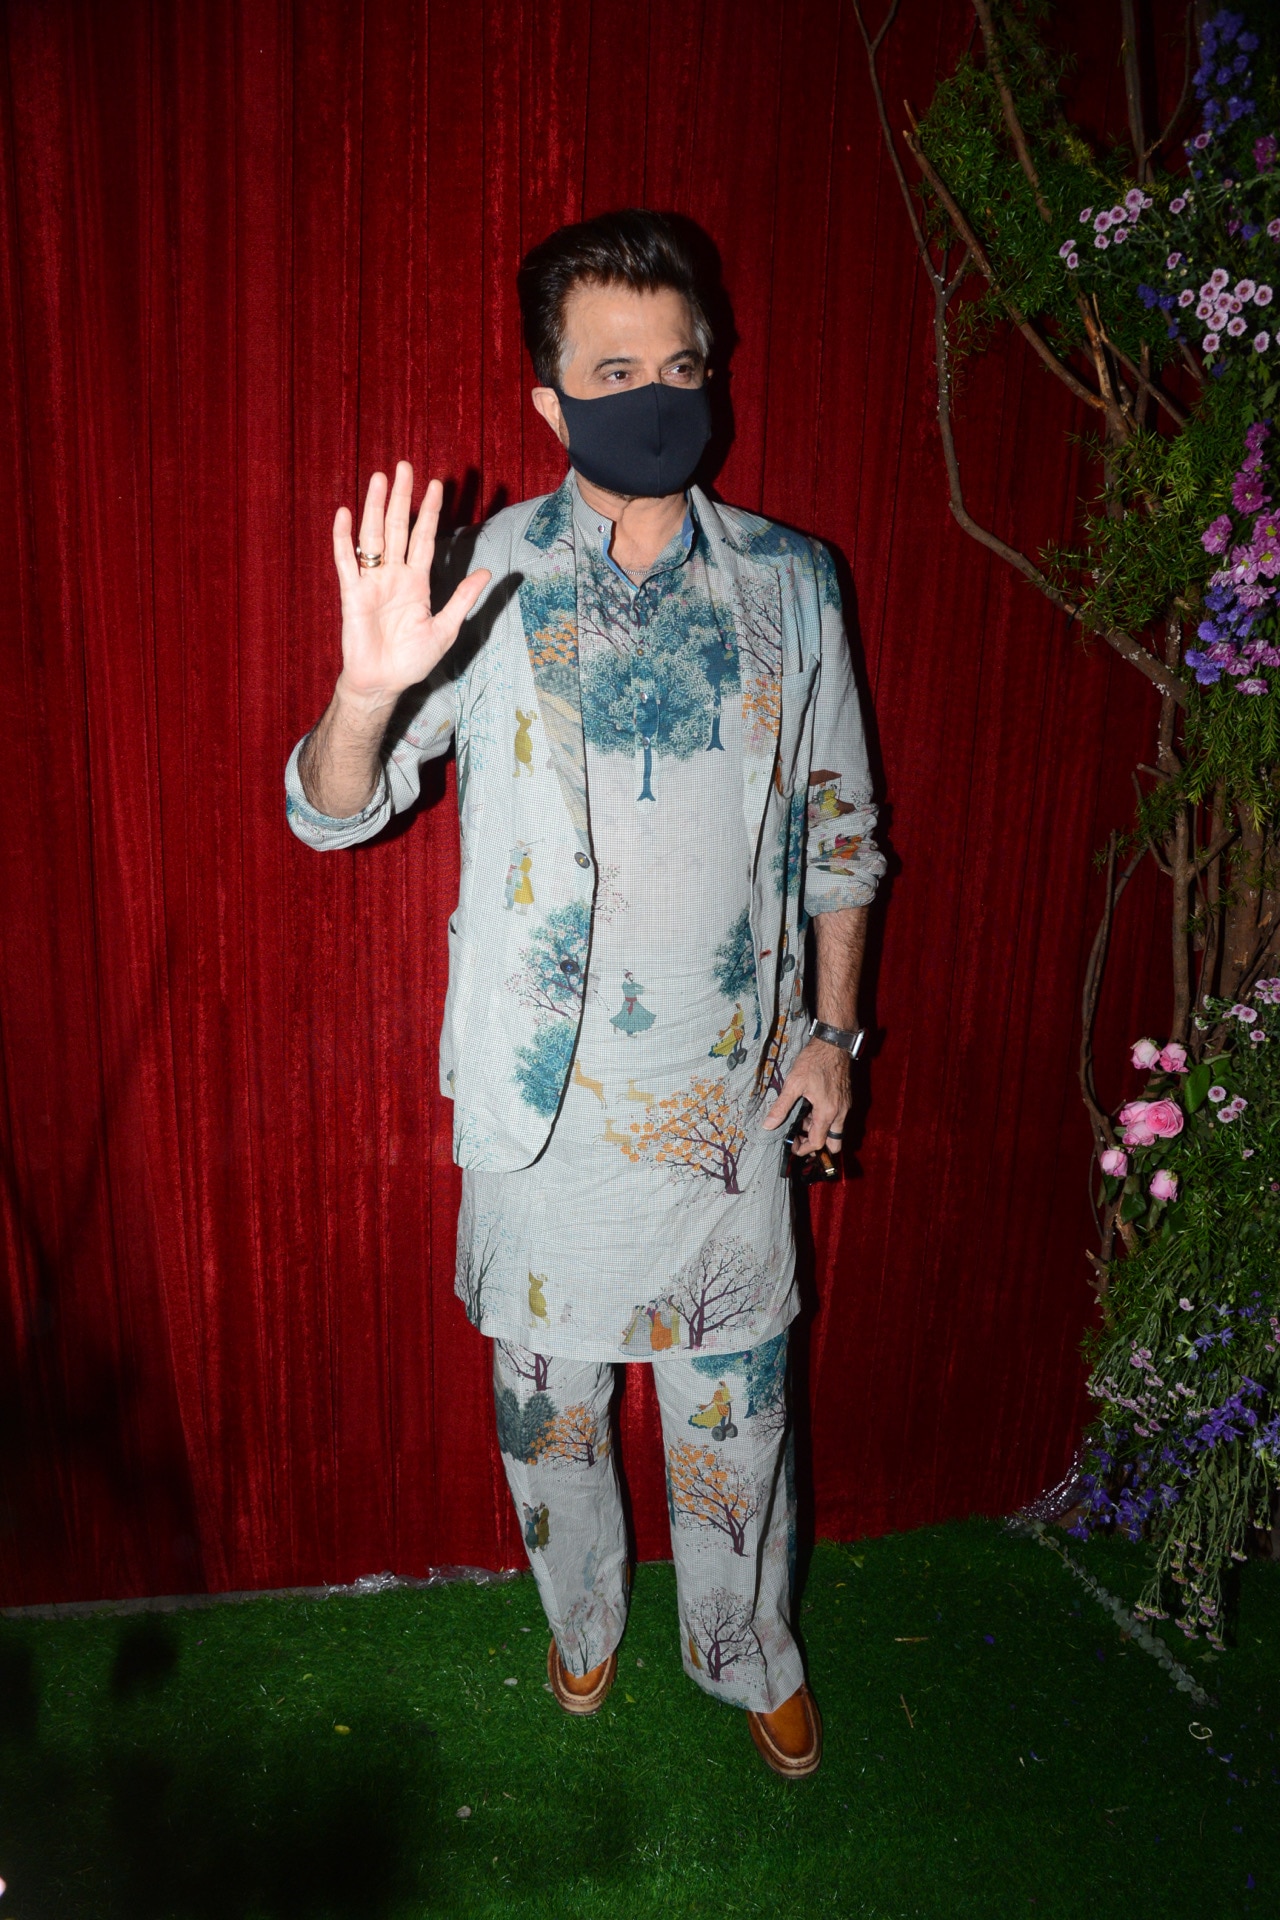 Superstar Anil Kapoor attended party in a blue attire but decided to keep his mask on. (Photo: Viral Bhayani)